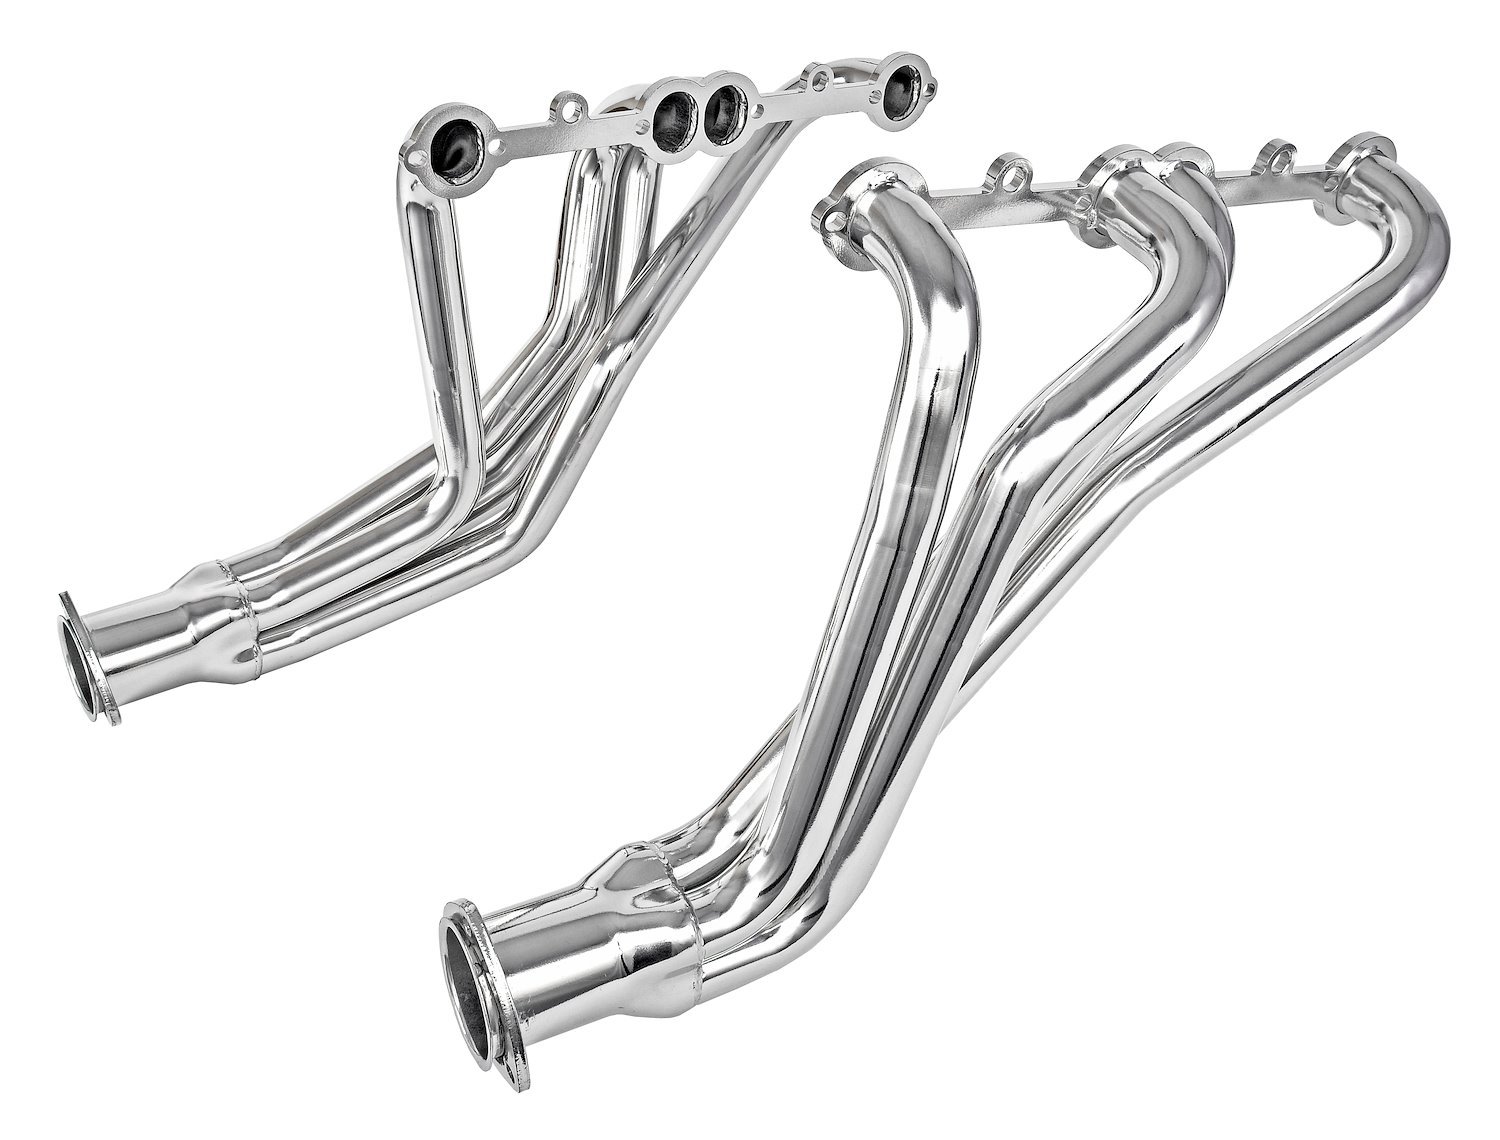 Stainless Steel Long Tube Headers for 1966-1991 GM Truck with Small Block Chevy 265-400 ci [Silver Ceramic Finish]